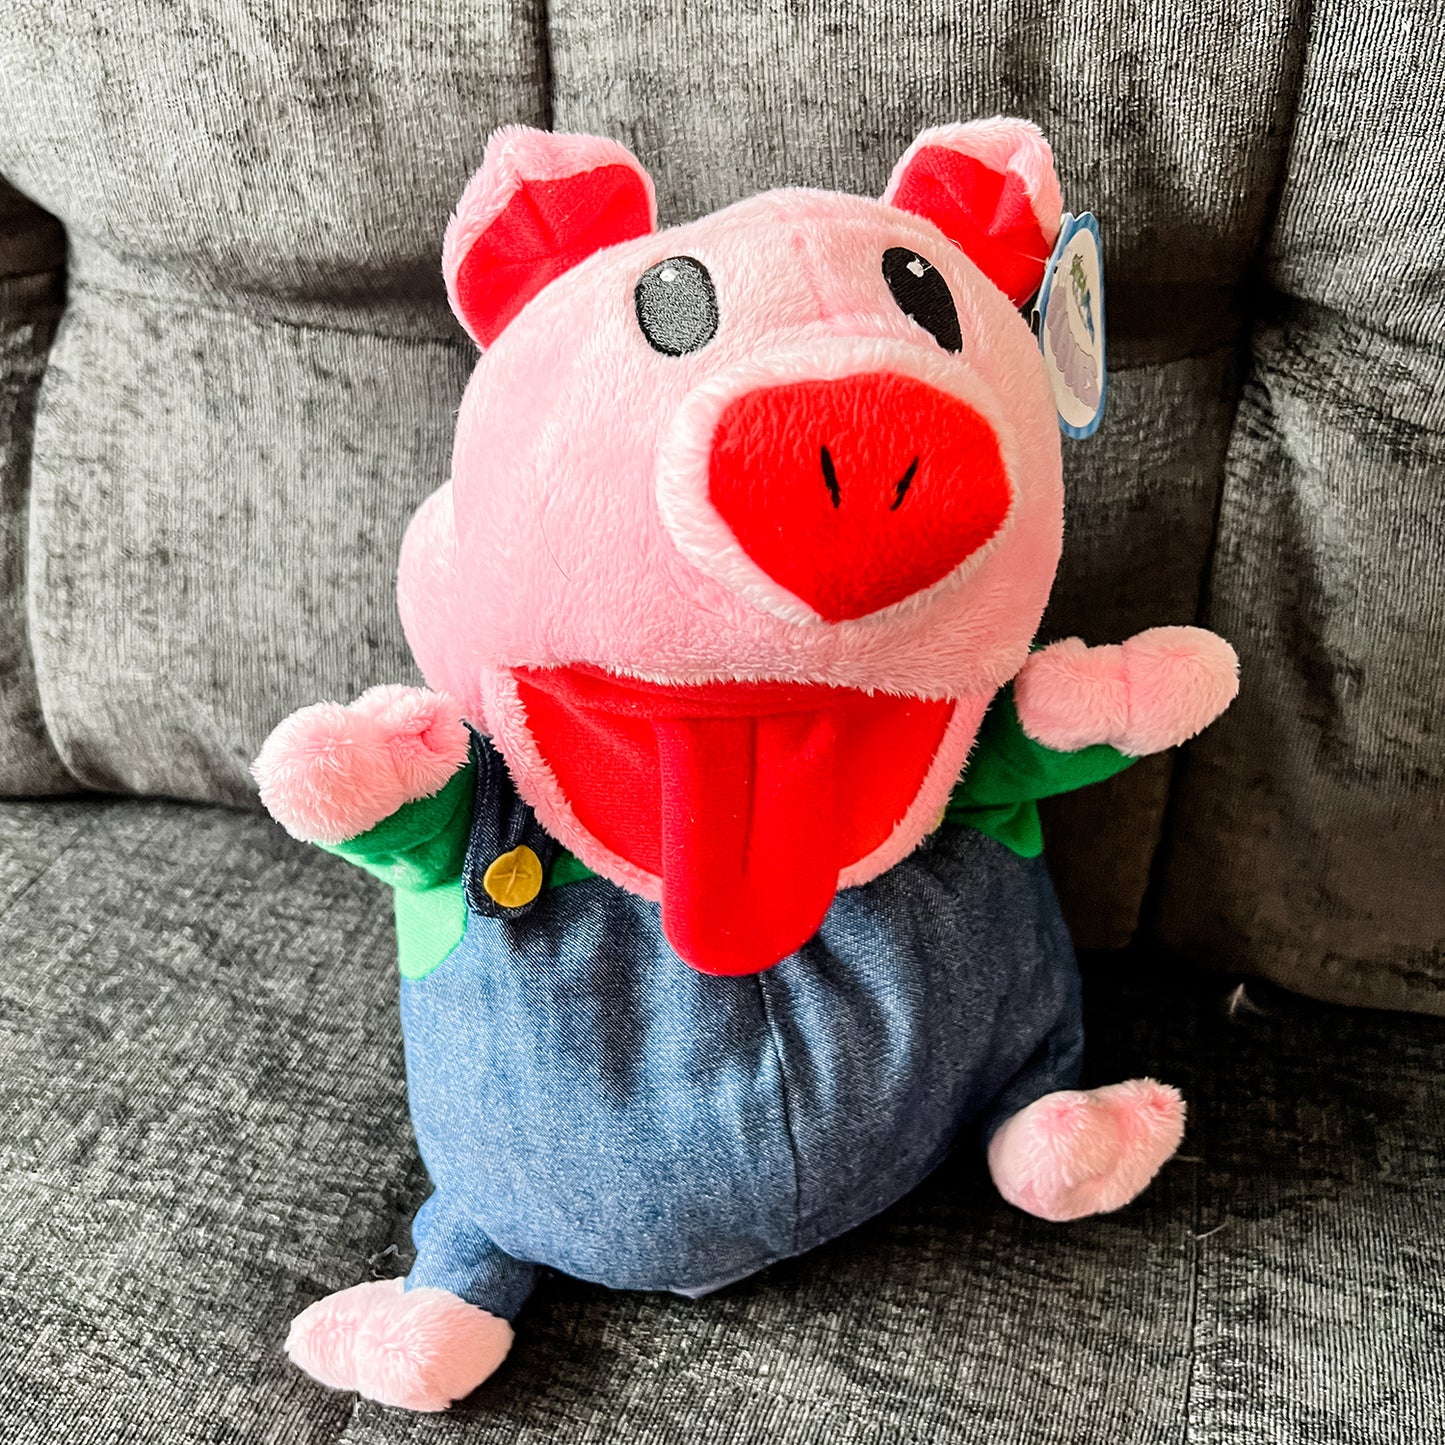 Pickles Pig Puppet by SimplyFun perfect for imaginative play for ages 4 and up